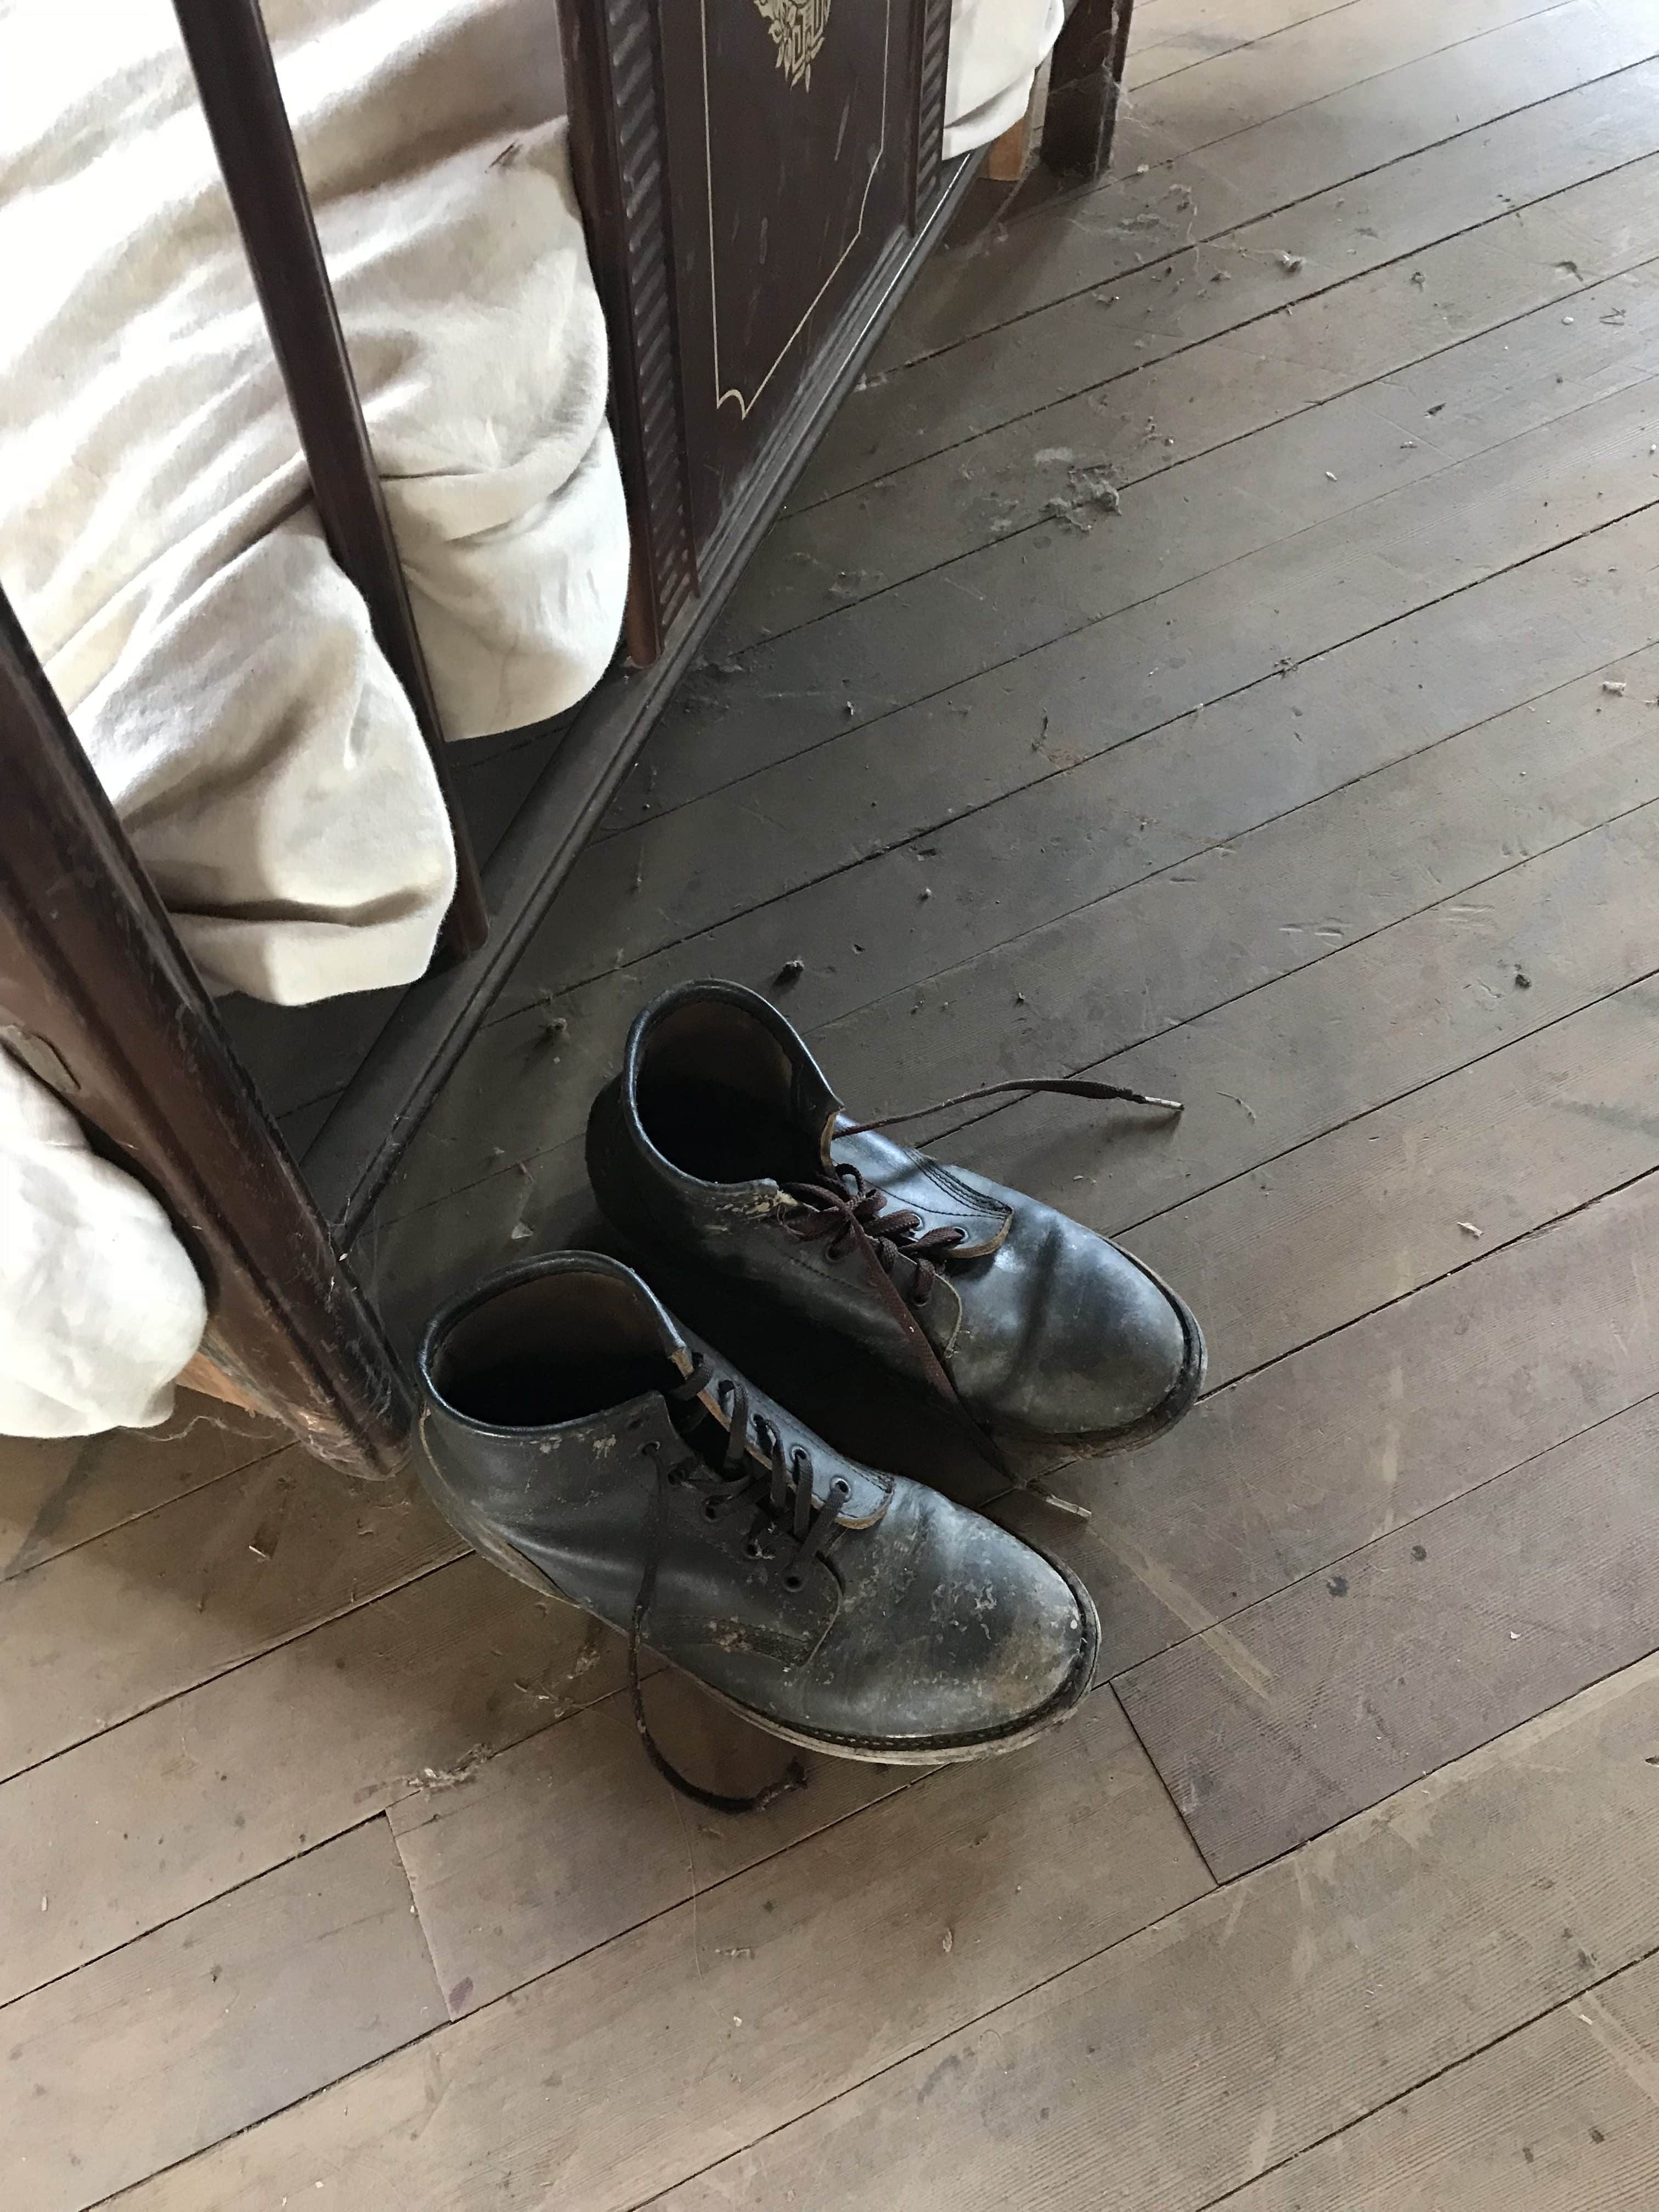 Pair of black shoes with untied laces at the foot of a metal bed